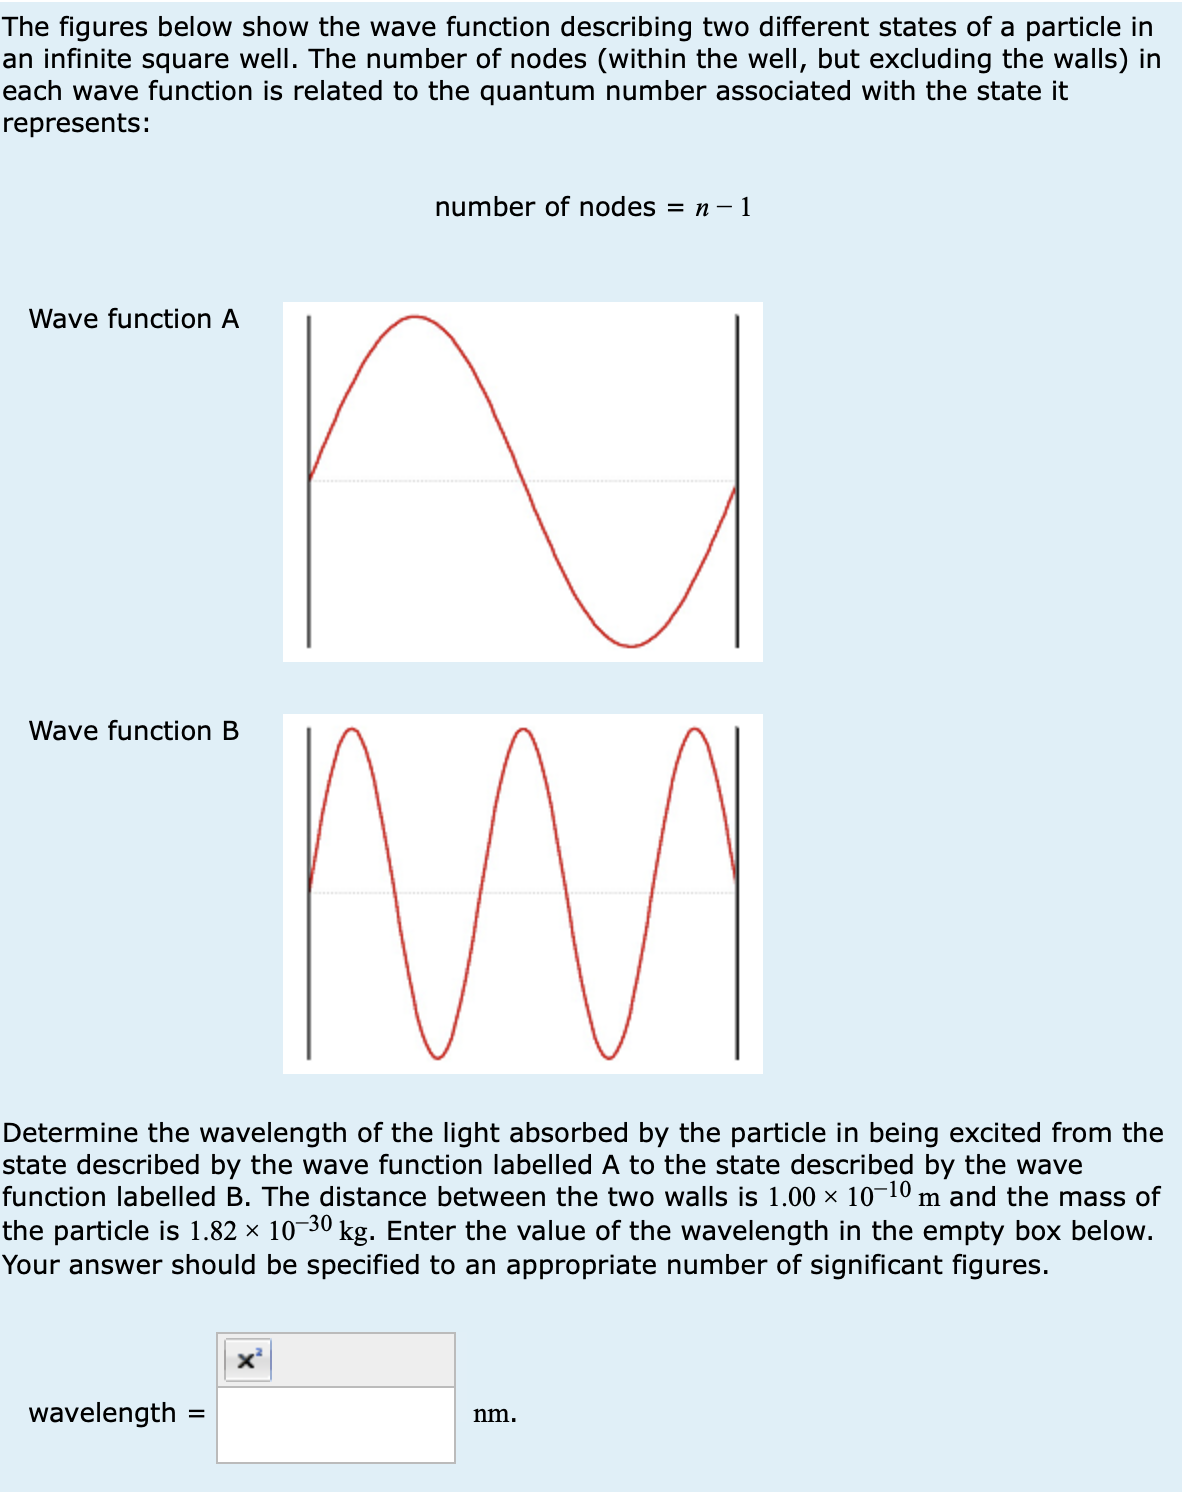 The figures below show the wave function describing two different states of a particle in
an infinite square well. The number of nodes (within the well, but excluding the walls) in
each wave function is related to the quantum number associated with the state it
represents:
Wave function A
number of nodes = n-1
Wave function B
M
Determine the wavelength of the light absorbed by the particle in being excited from the
state described by the wave function labelled A to the state described by the wave
function labelled B. The distance between the two walls is 1.00 × 10-10 m and the mass of
the particle is 1.82 × 10-30 kg. Enter the value of the wavelength in the empty box below.
Your answer should be specified to an appropriate number of significant figures.
wavelength
=
nm.